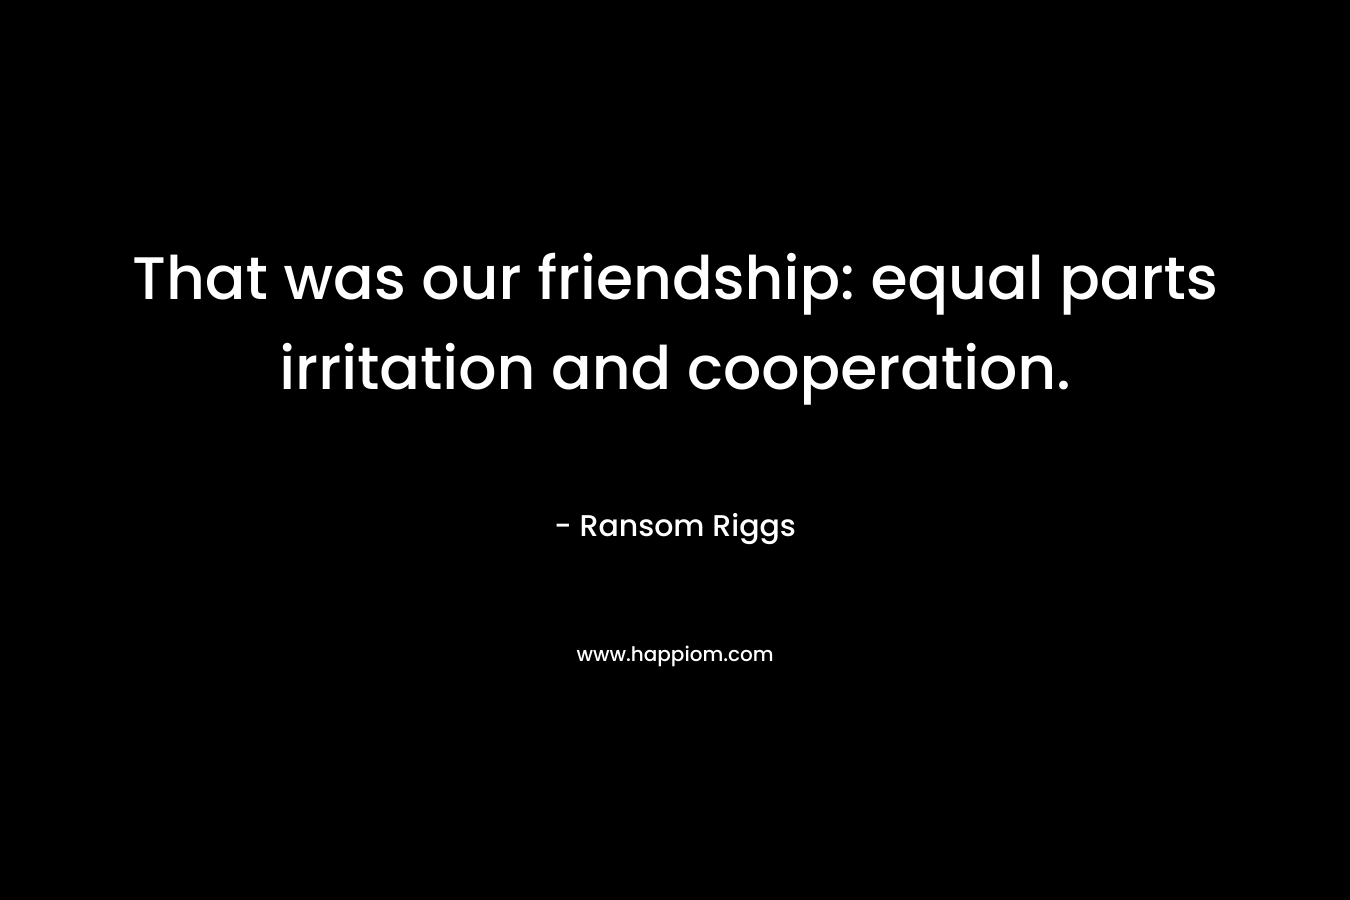 That was our friendship: equal parts irritation and cooperation. – Ransom Riggs